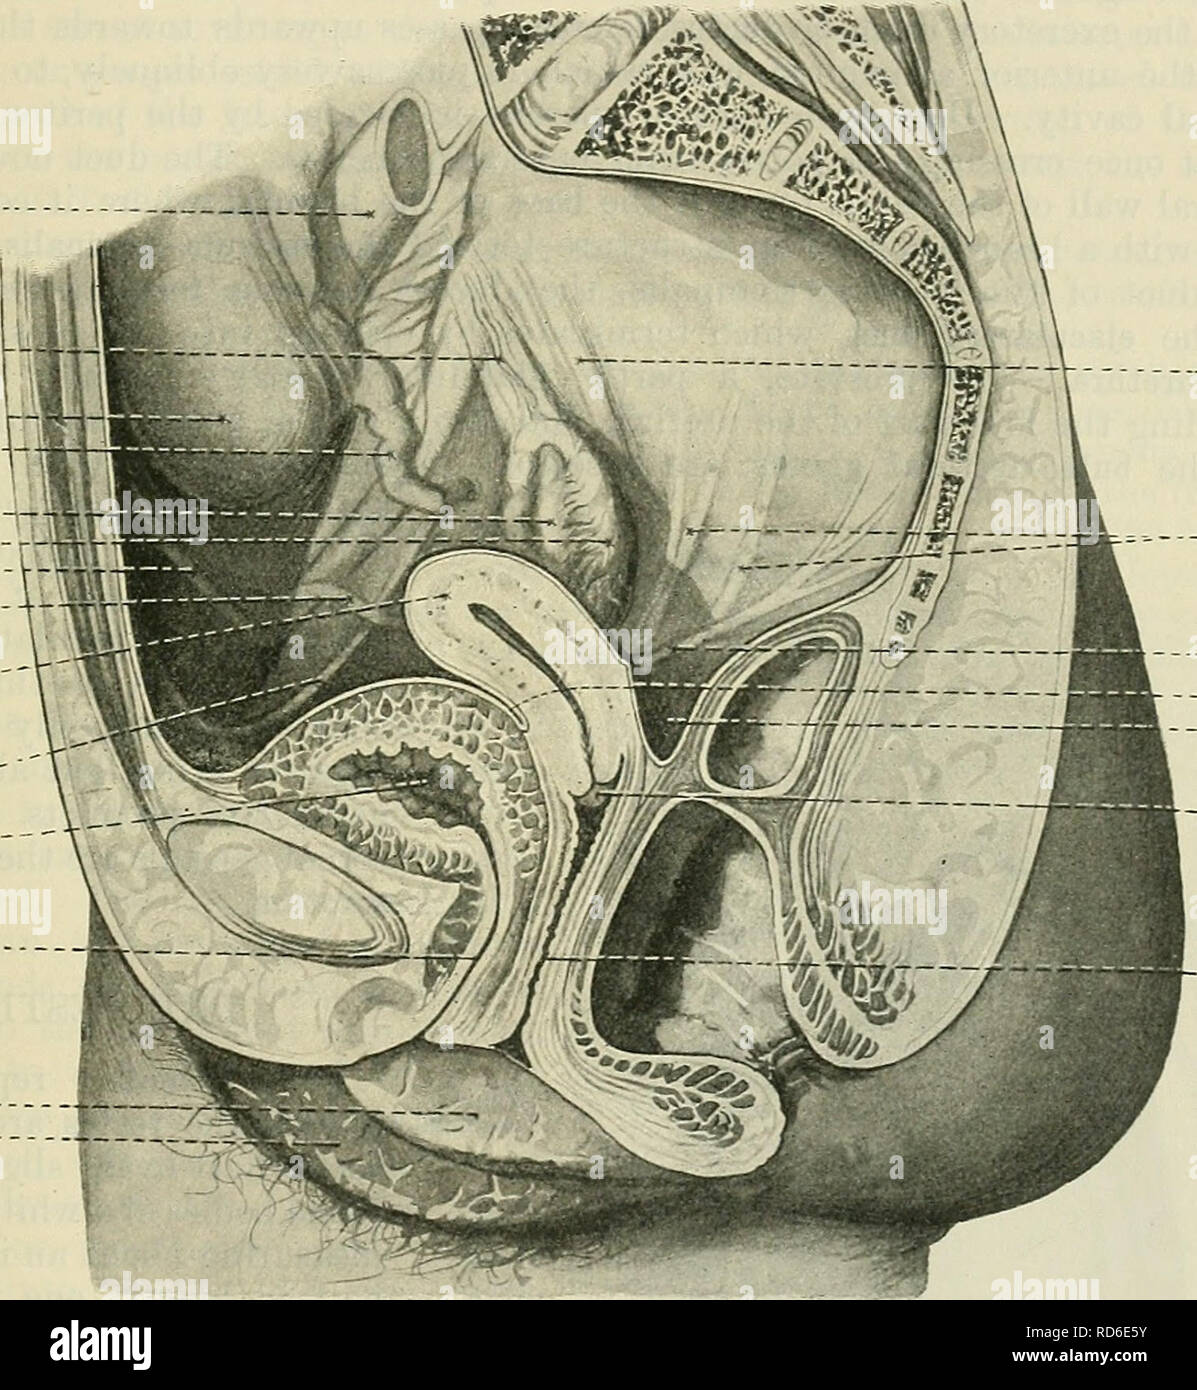 . Cunningham's Text-book of anatomy. Anatomy. THE FEMALE UBETHEA. 1285 Structure.—The wall of the female urethra is thick and contains much fibrous tissue, which passes without any sharp line of demarkation into the surrounding mass of connective tissue. The tunica muscularis or muscular coat of the urethra is continuous above with that of the bladder, and is composed of layers of circularly and longitudi- nally disposed smooth muscle fibres arranged to form outer and inner strata. Within the muscular coat the wall of the urethra is very vascular, and the canal itself is lined by a pale mucous Stock Photo